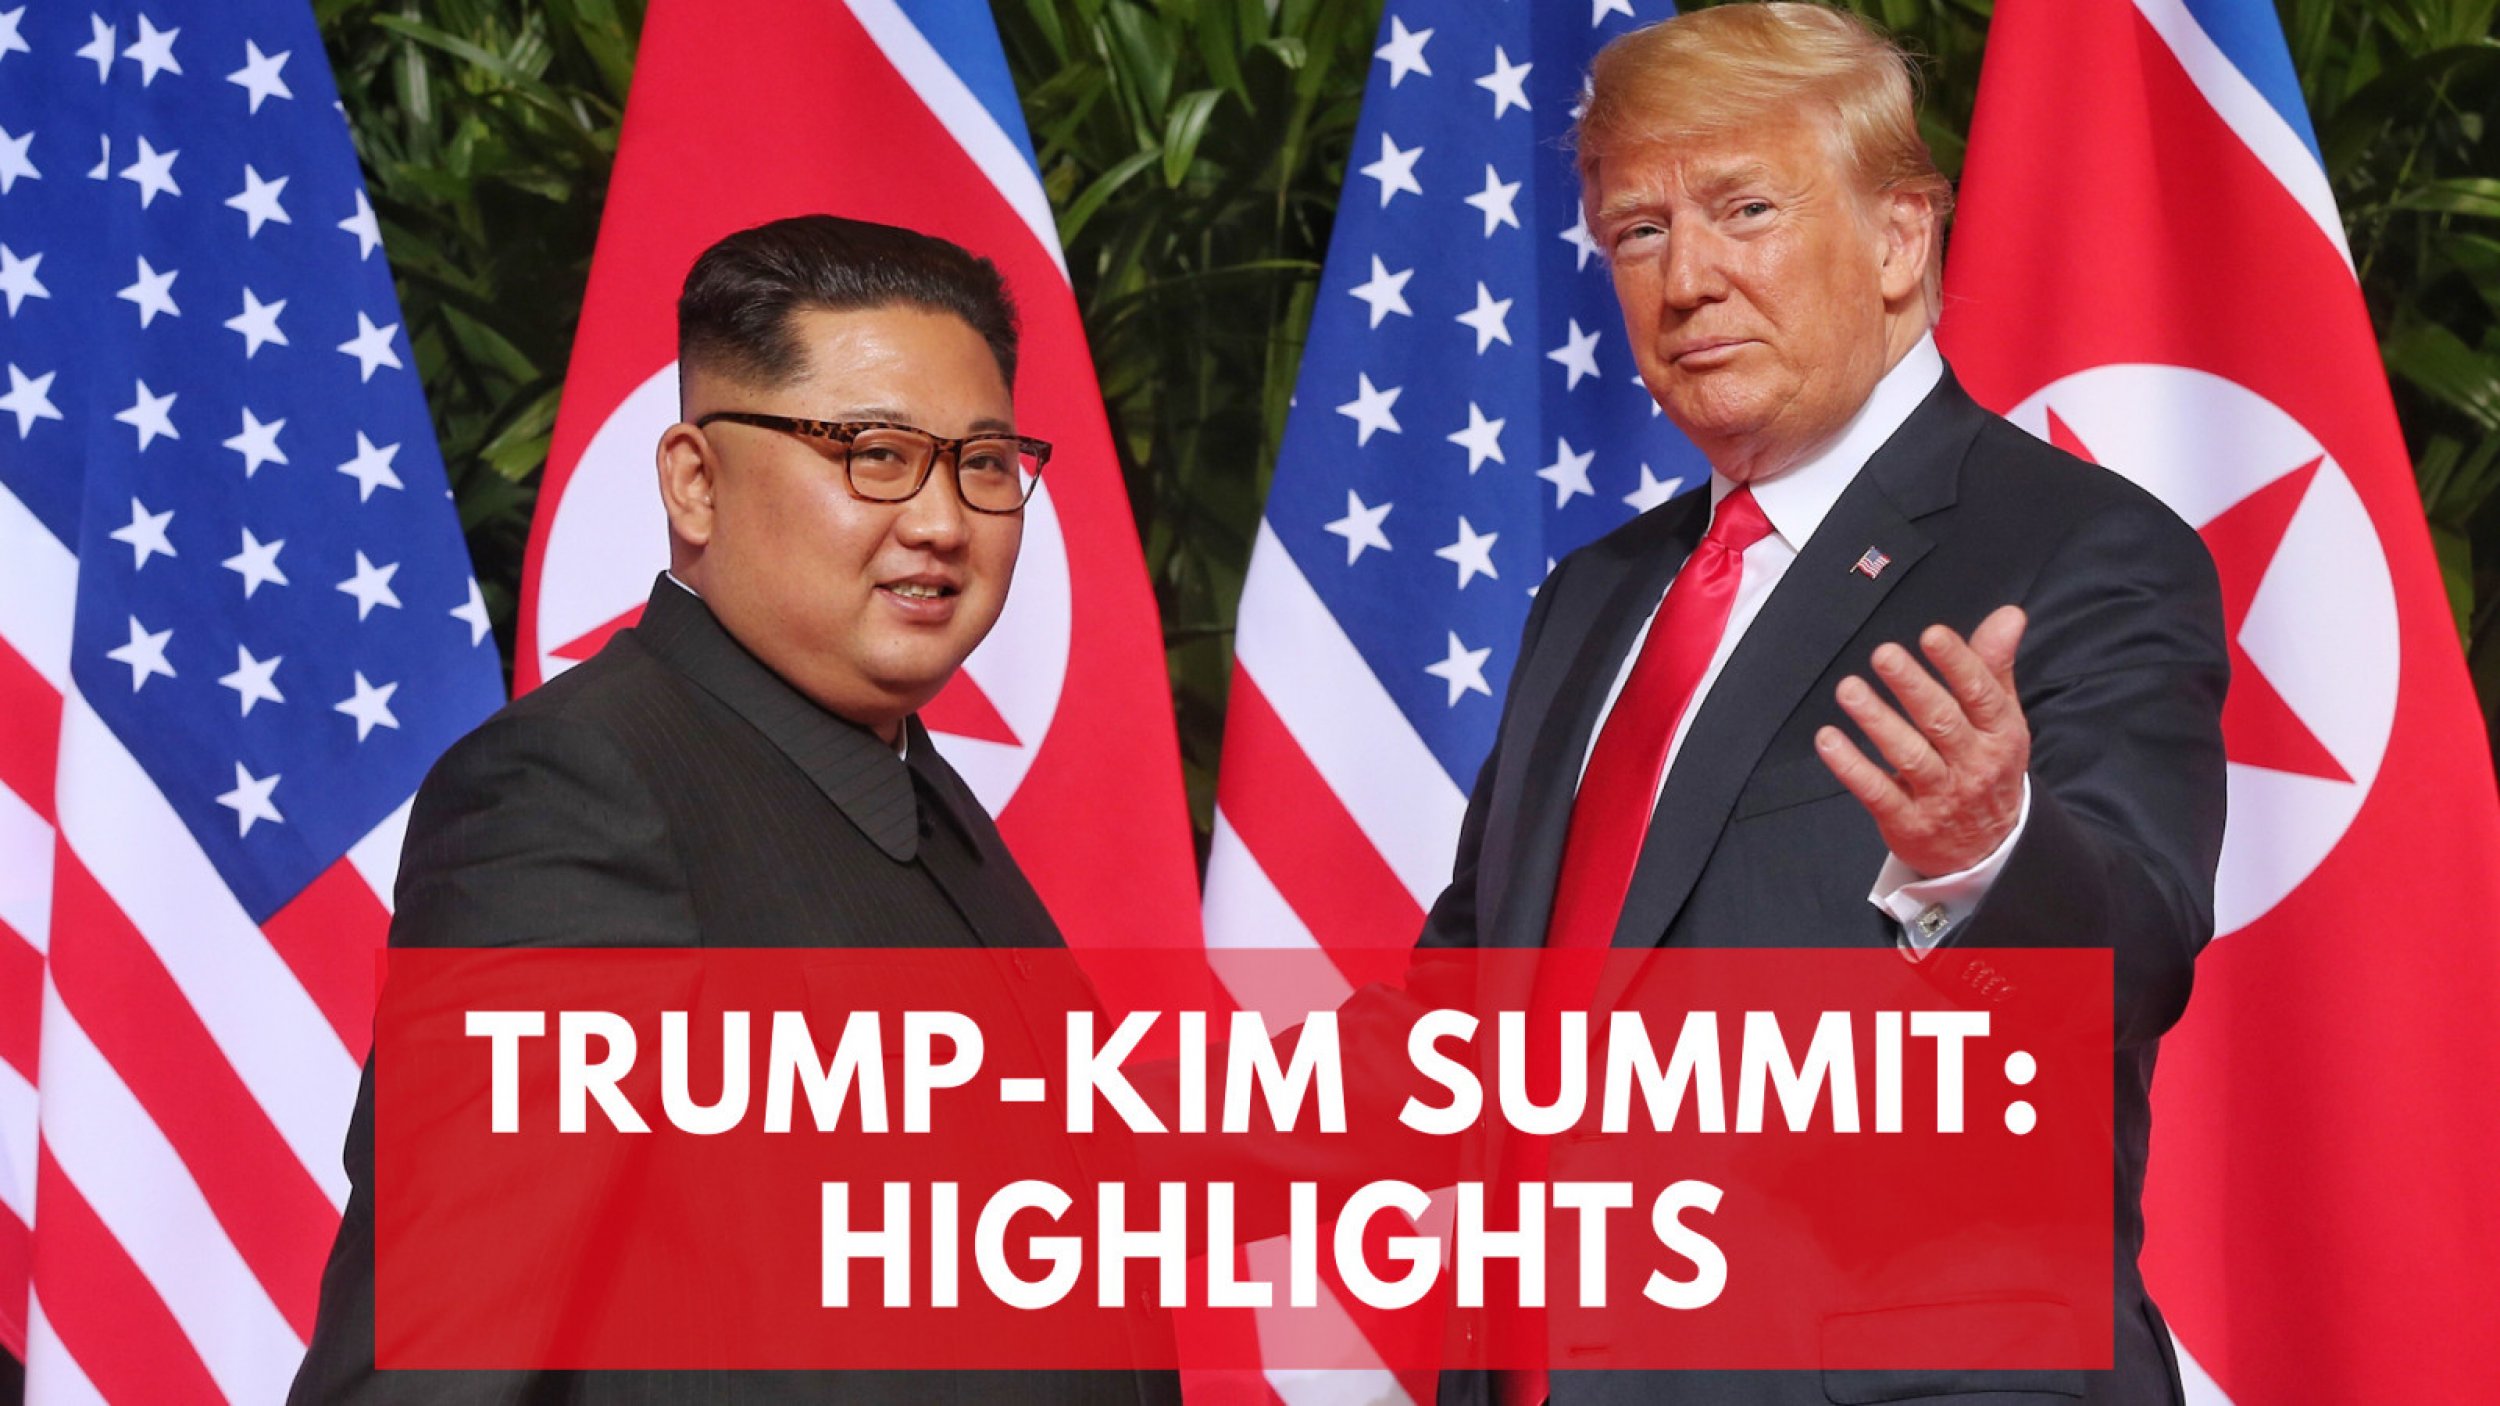 Trump-Kim Summit Key Moments From Their Historic Meeting In Singapore